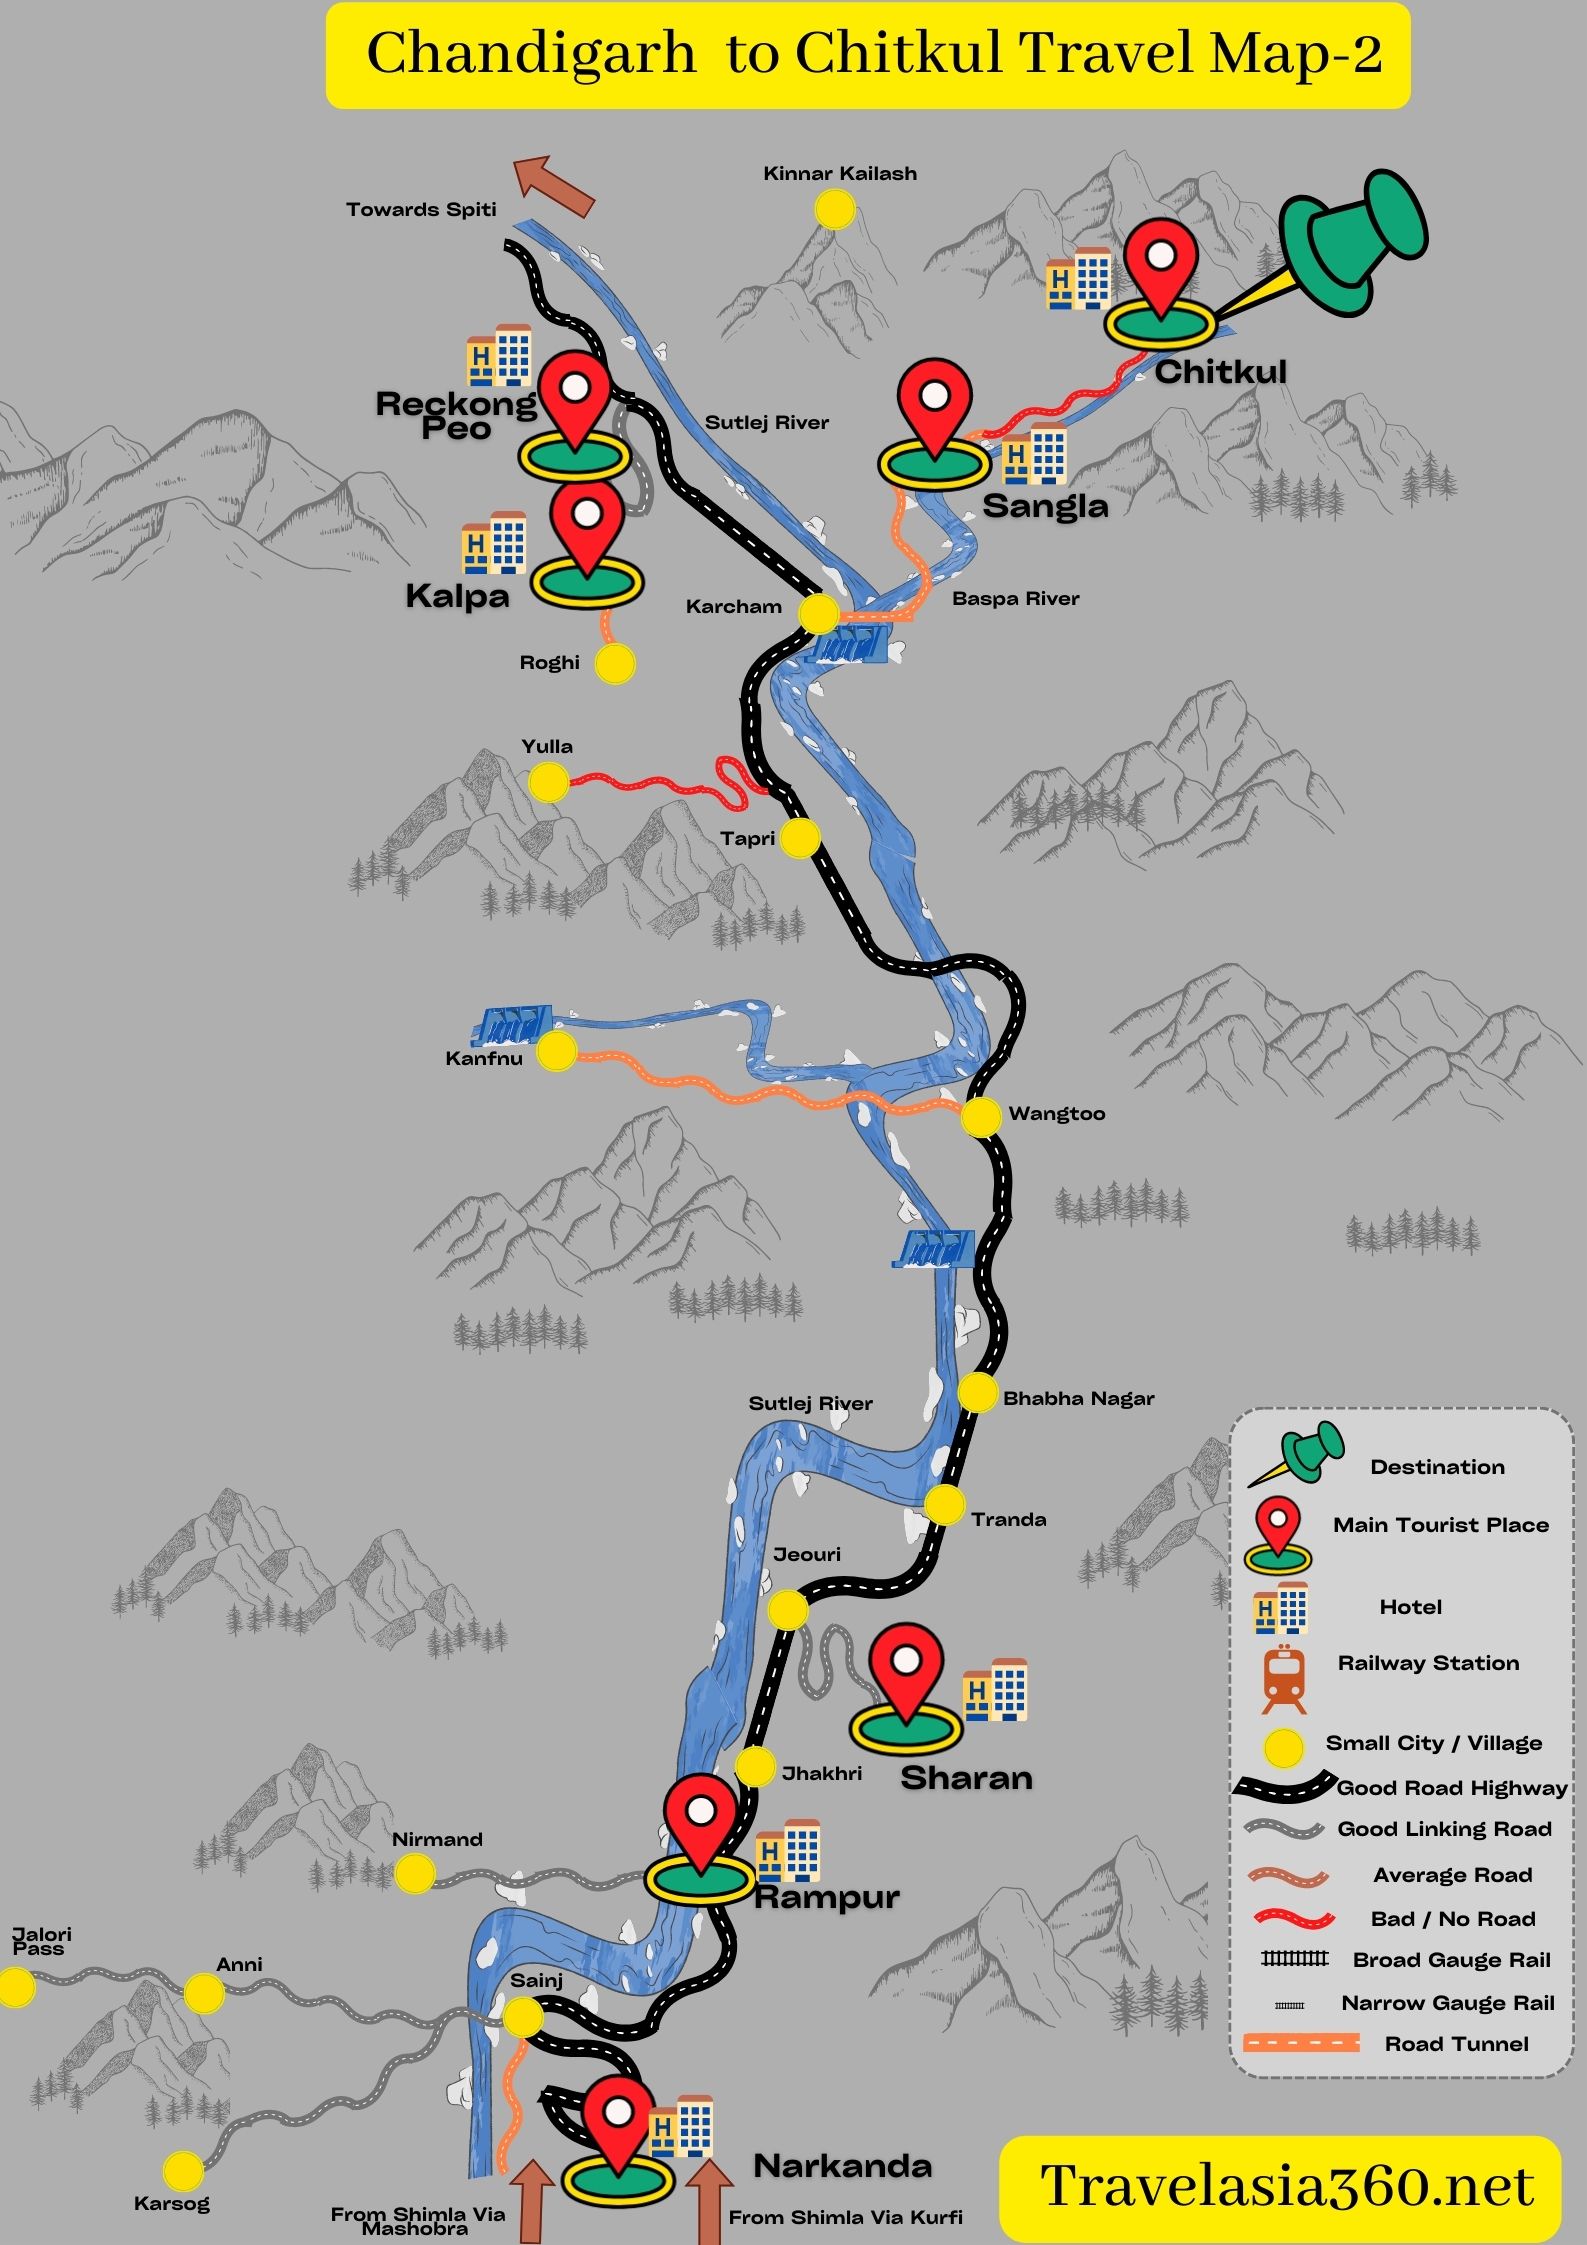 How to reach Chitkul from Chandigarh